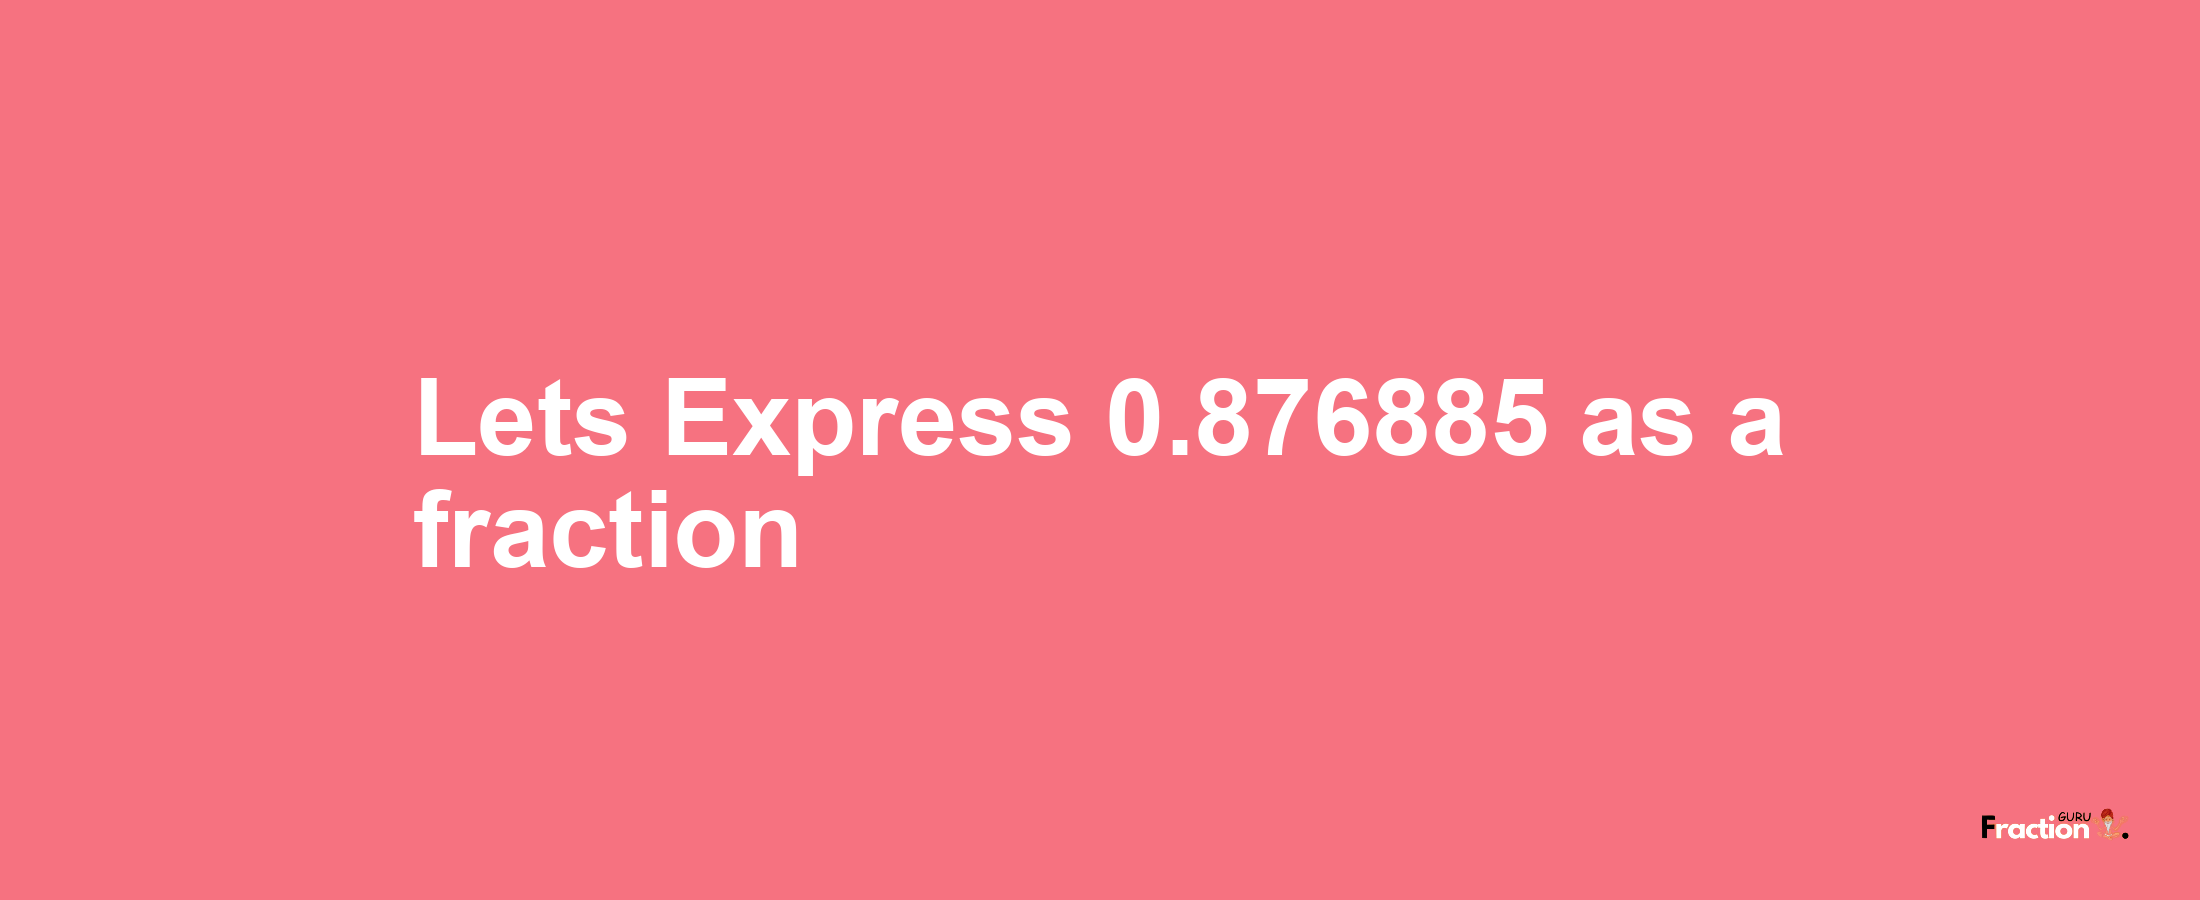 Lets Express 0.876885 as afraction